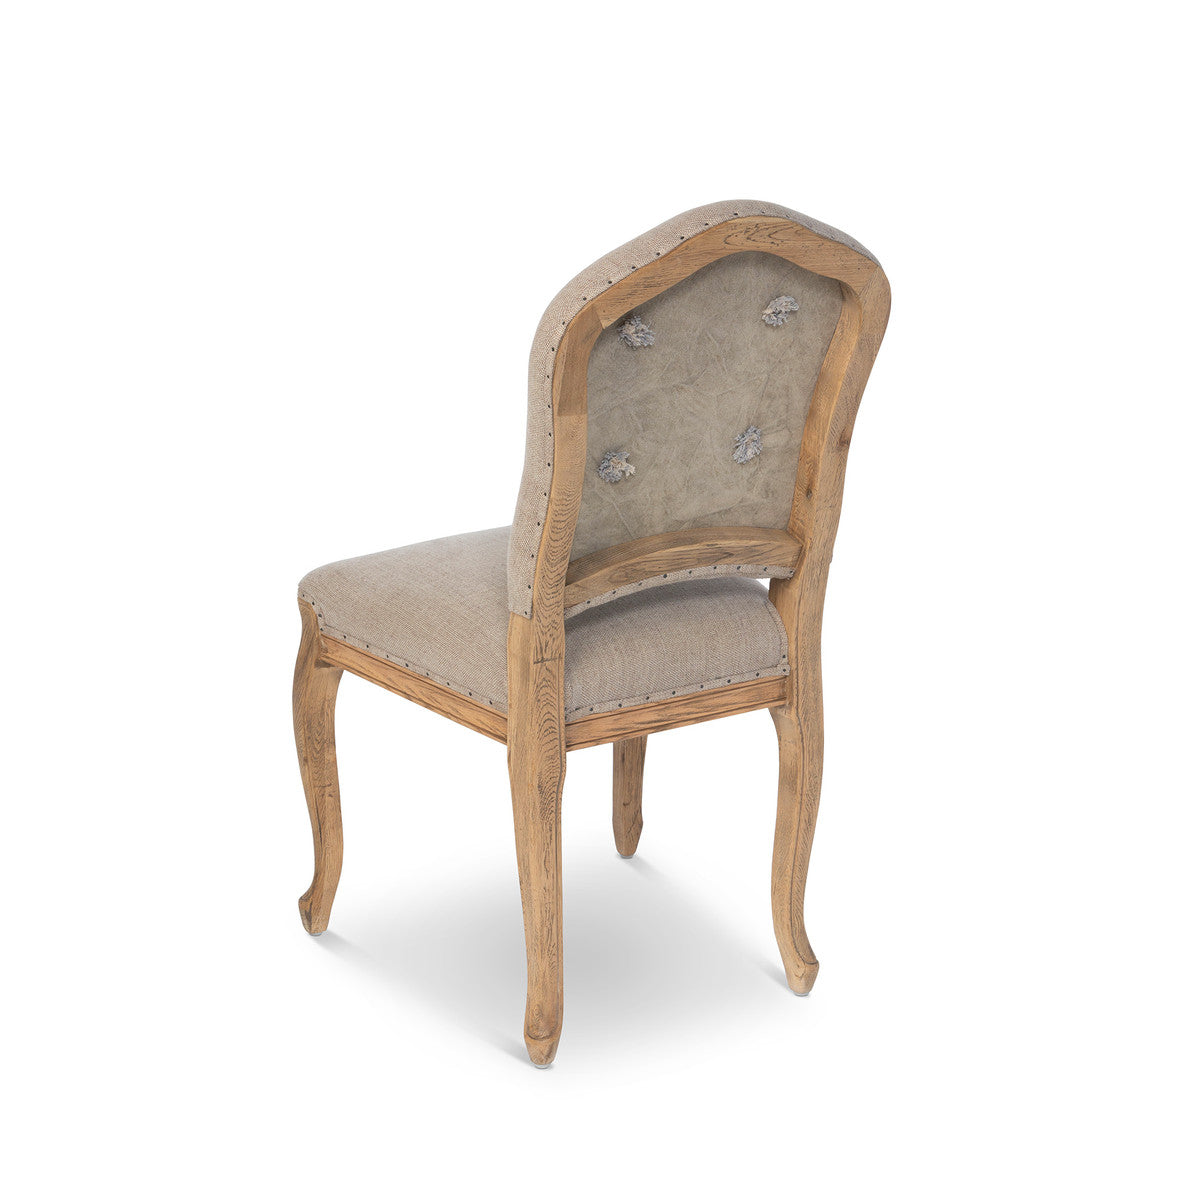 St. Louis Dining Chair